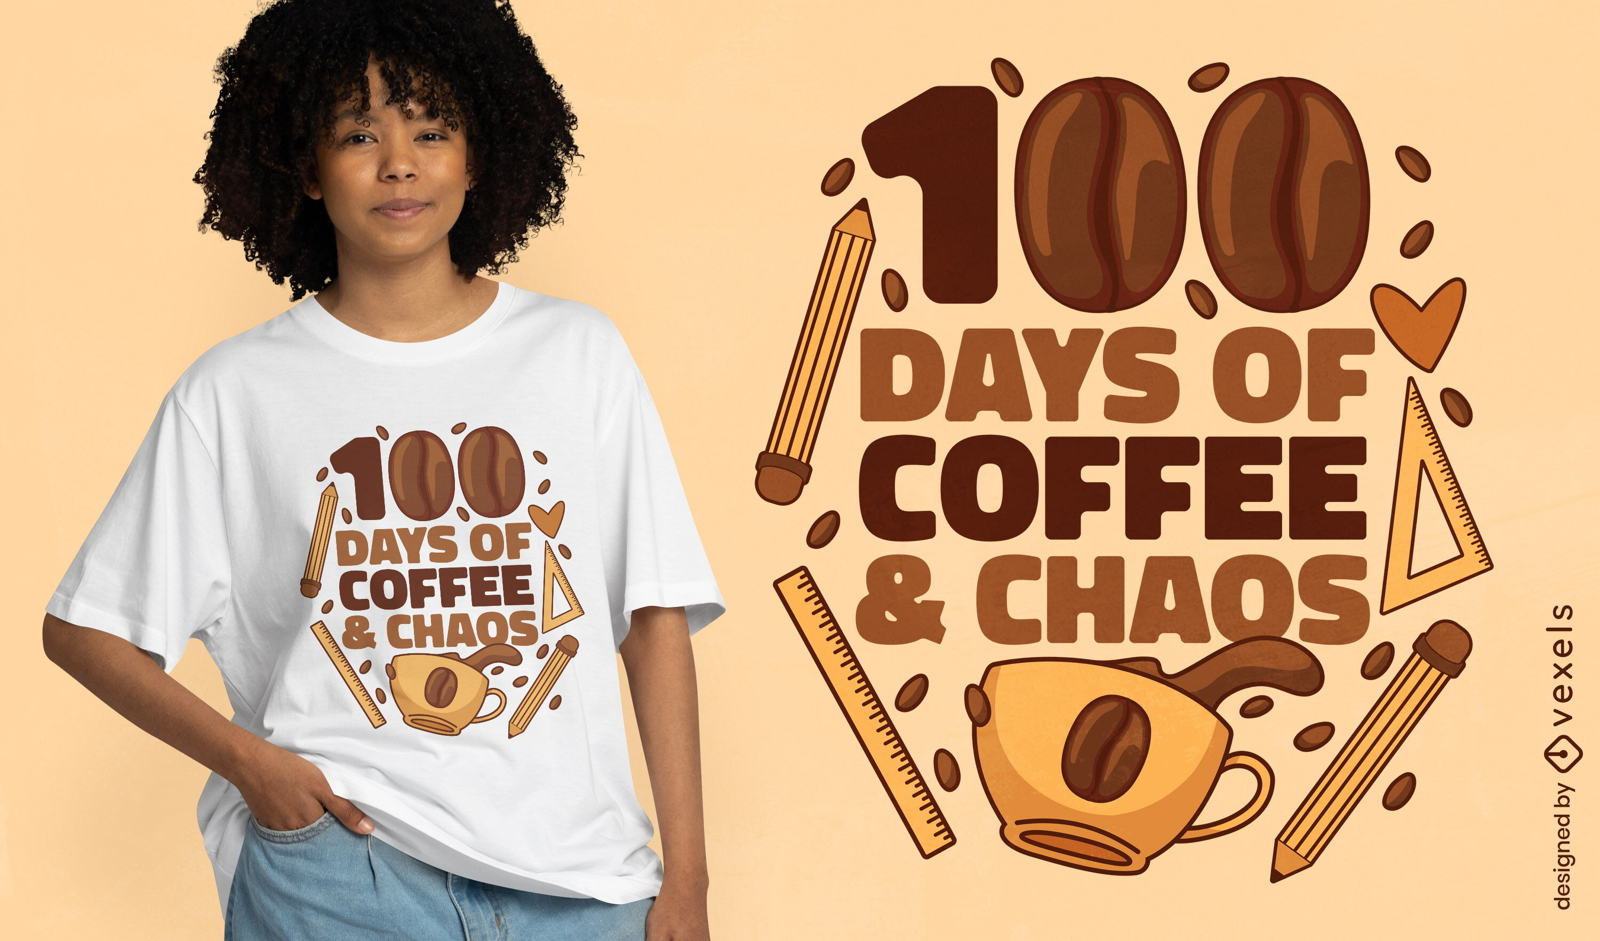 School coffe and chaos t-shirt design 